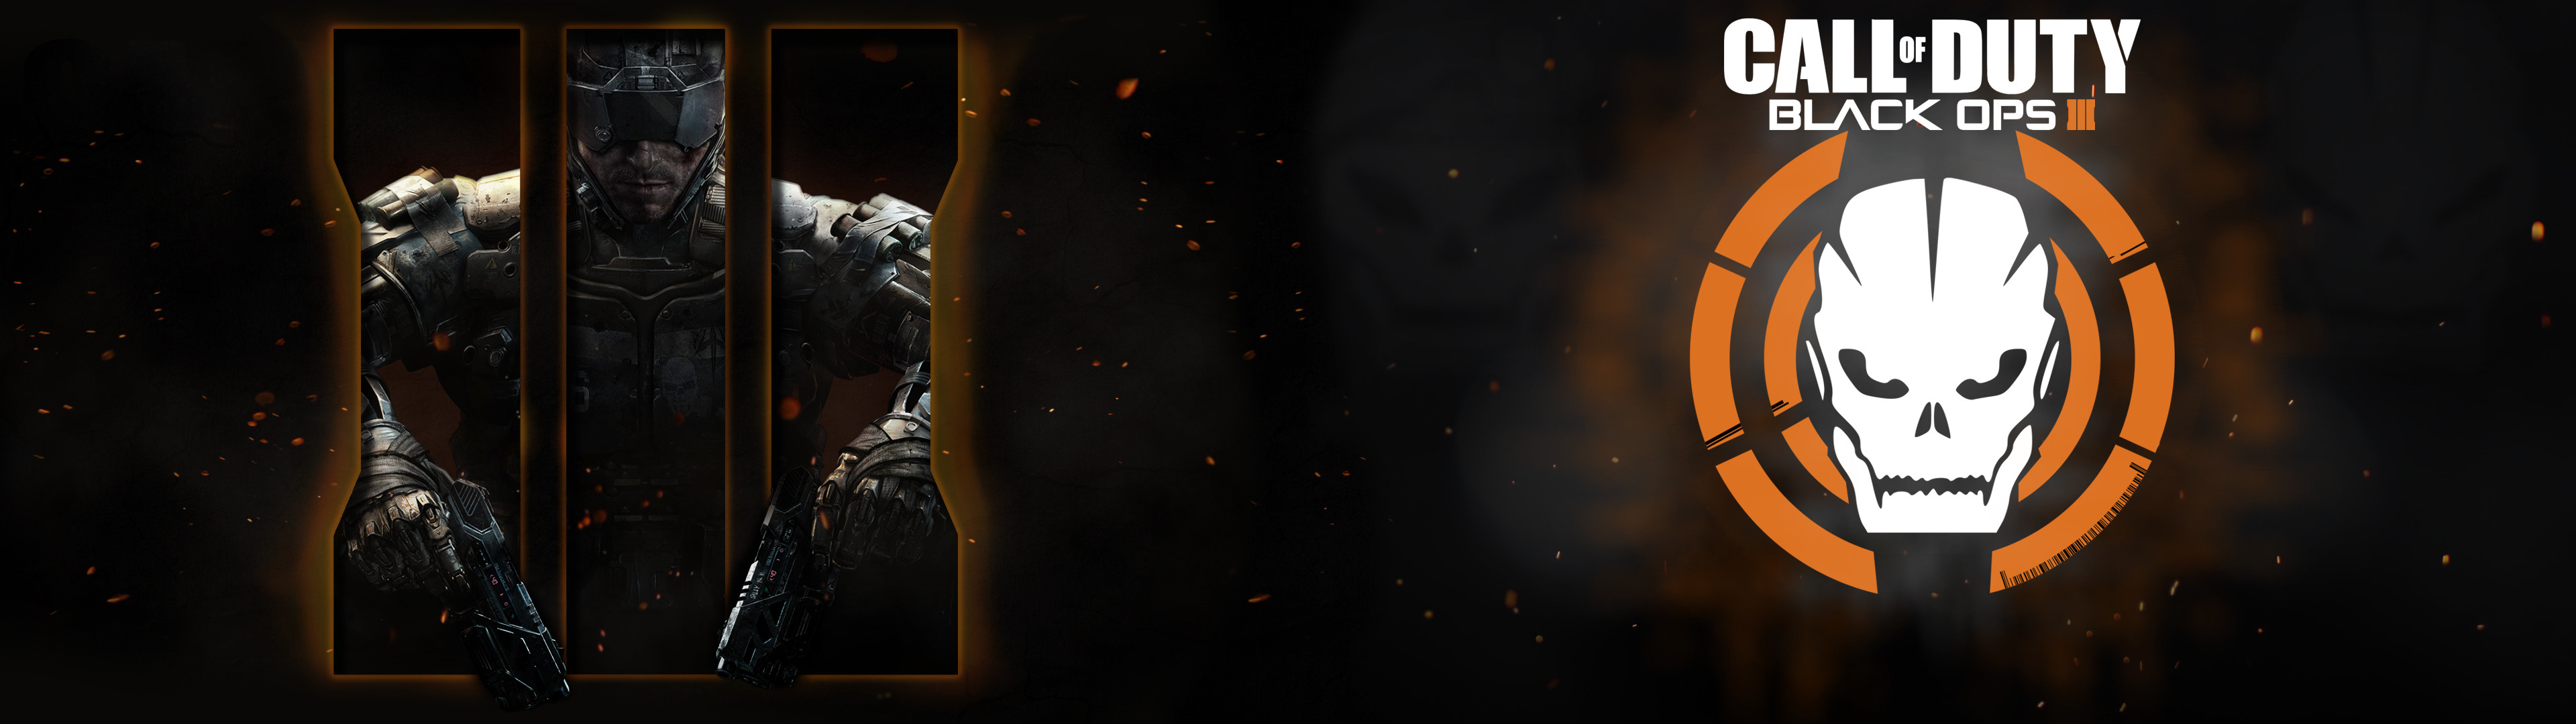 3840x1080 ... Call of Duty: Black Ops 3 Dual Wallpaper 05 by Toby-Affenbude